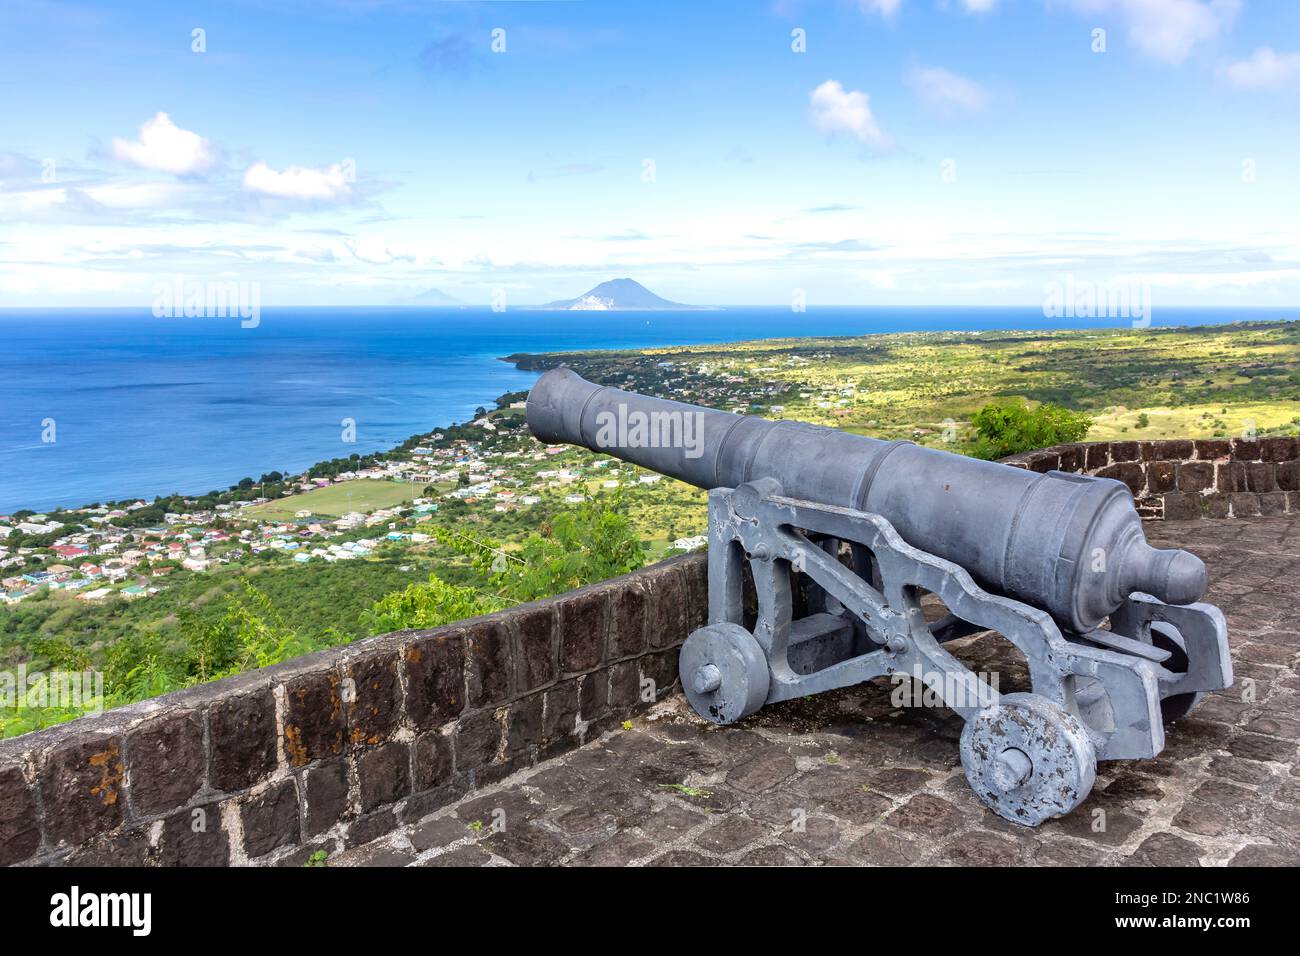 Western Place of Arms, Fort George, Brimstone Hill Fortress National Park, Sandy Point Town, St. Kitts, St. Kitts and Nevis, Caribbean Stock Photo